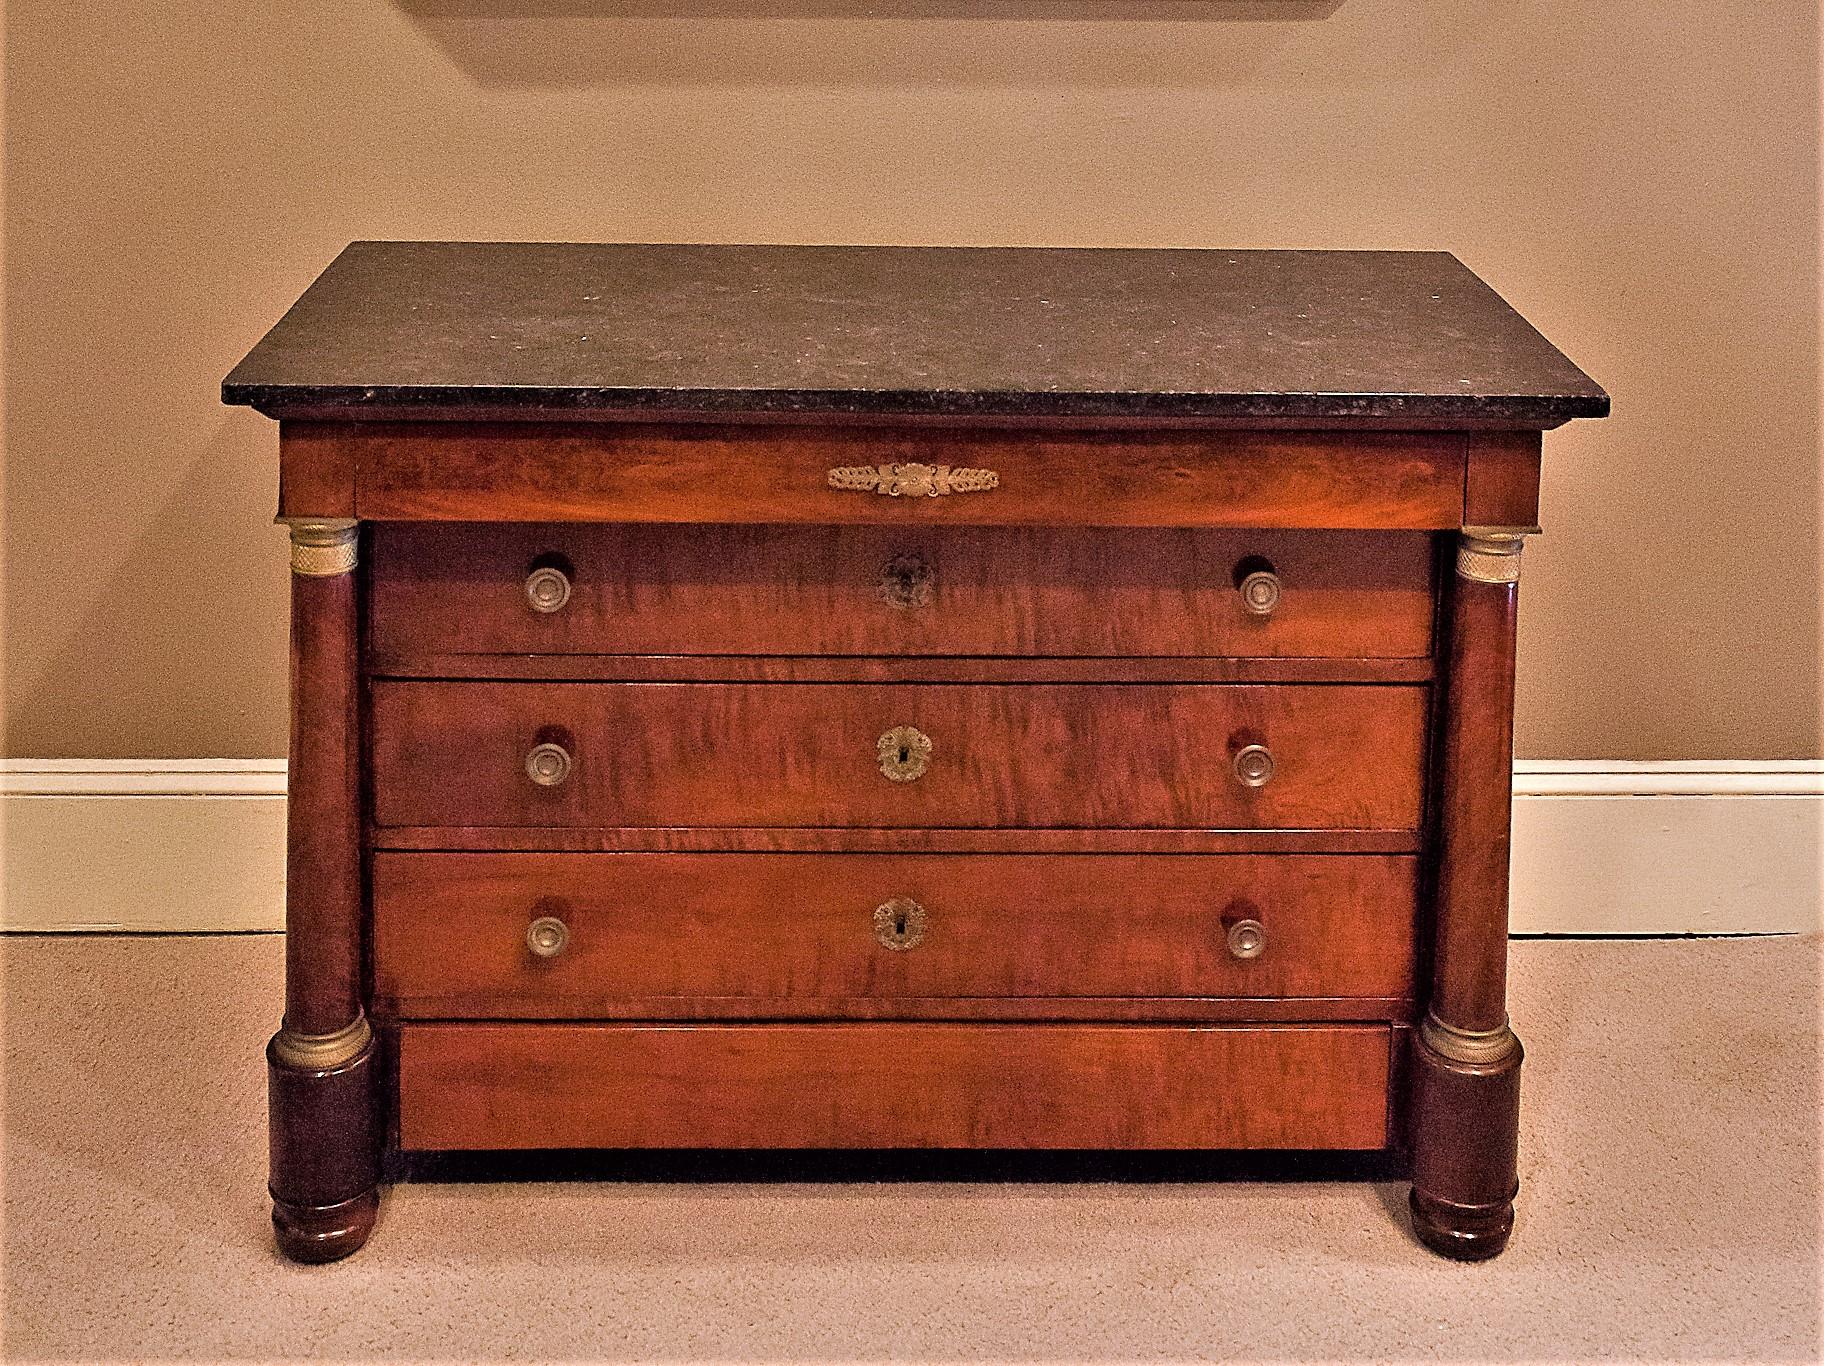 French polished mahogany and mahogany veneer with French oak secondary woods and a dark stone/marble top that appears to be original. Ormolu pulls and mounts, including on the freestanding columns. Bun feet. This commode/chest has five drawers